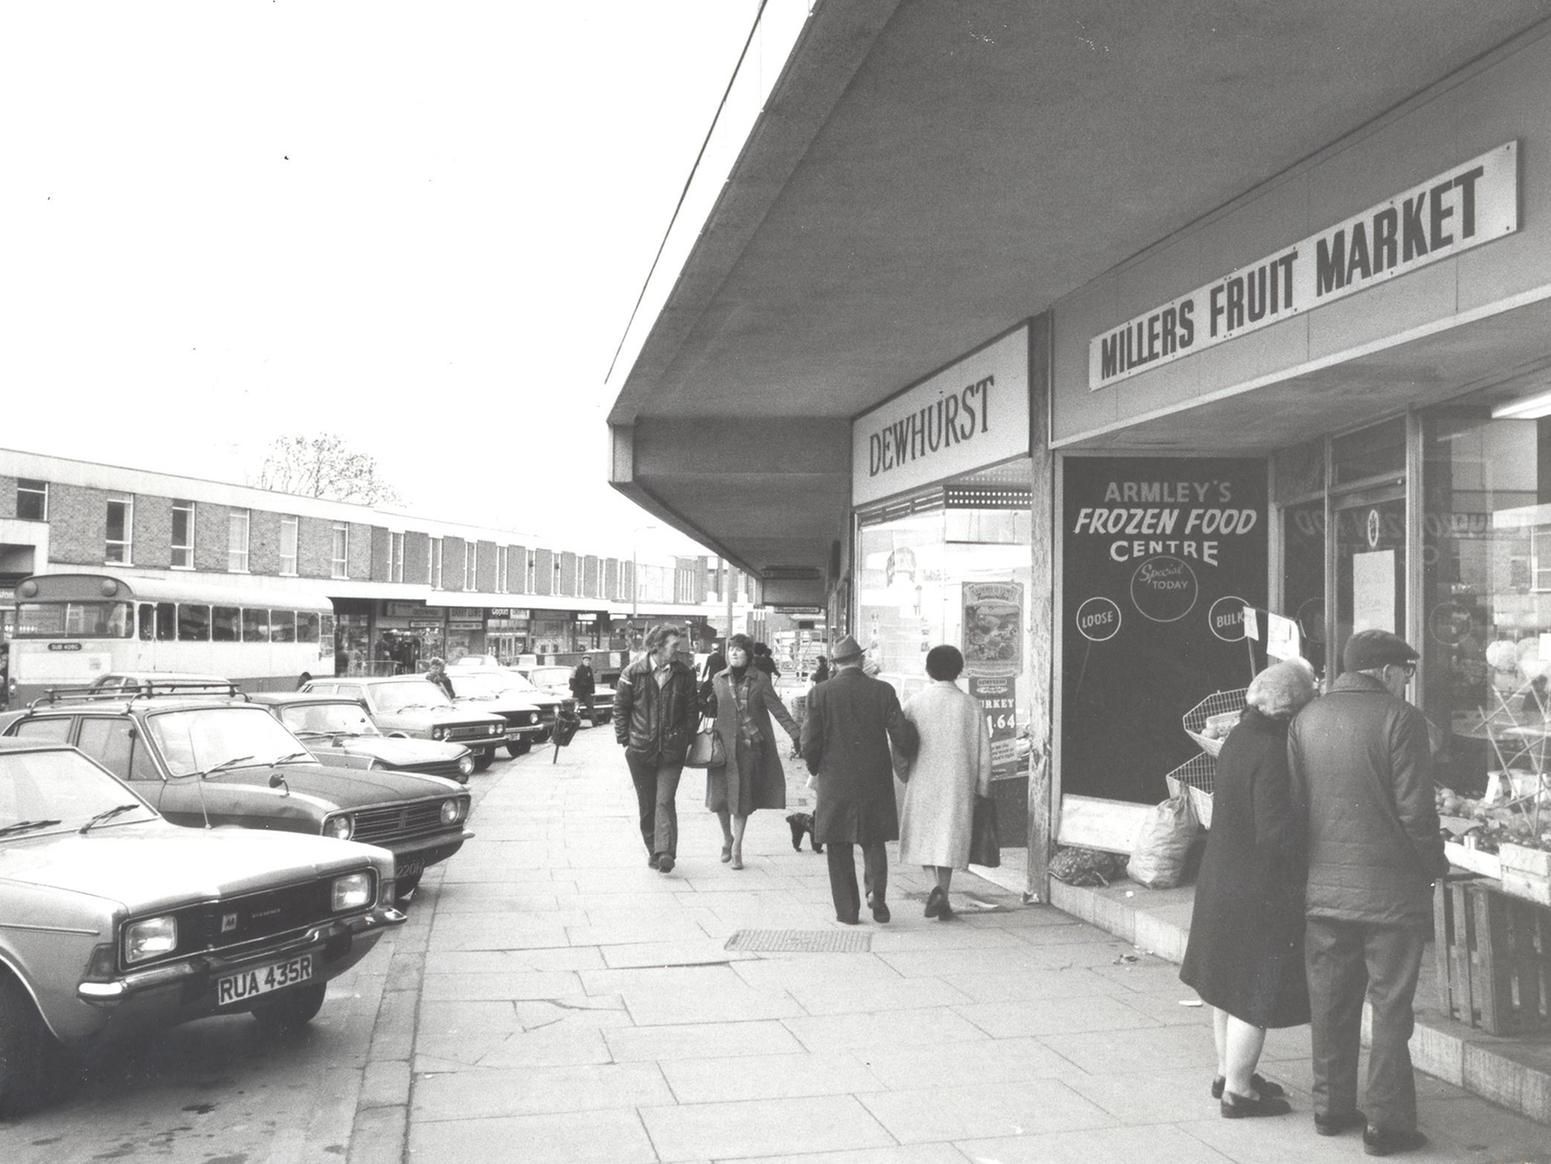 Shoppers on Armley Town Street.